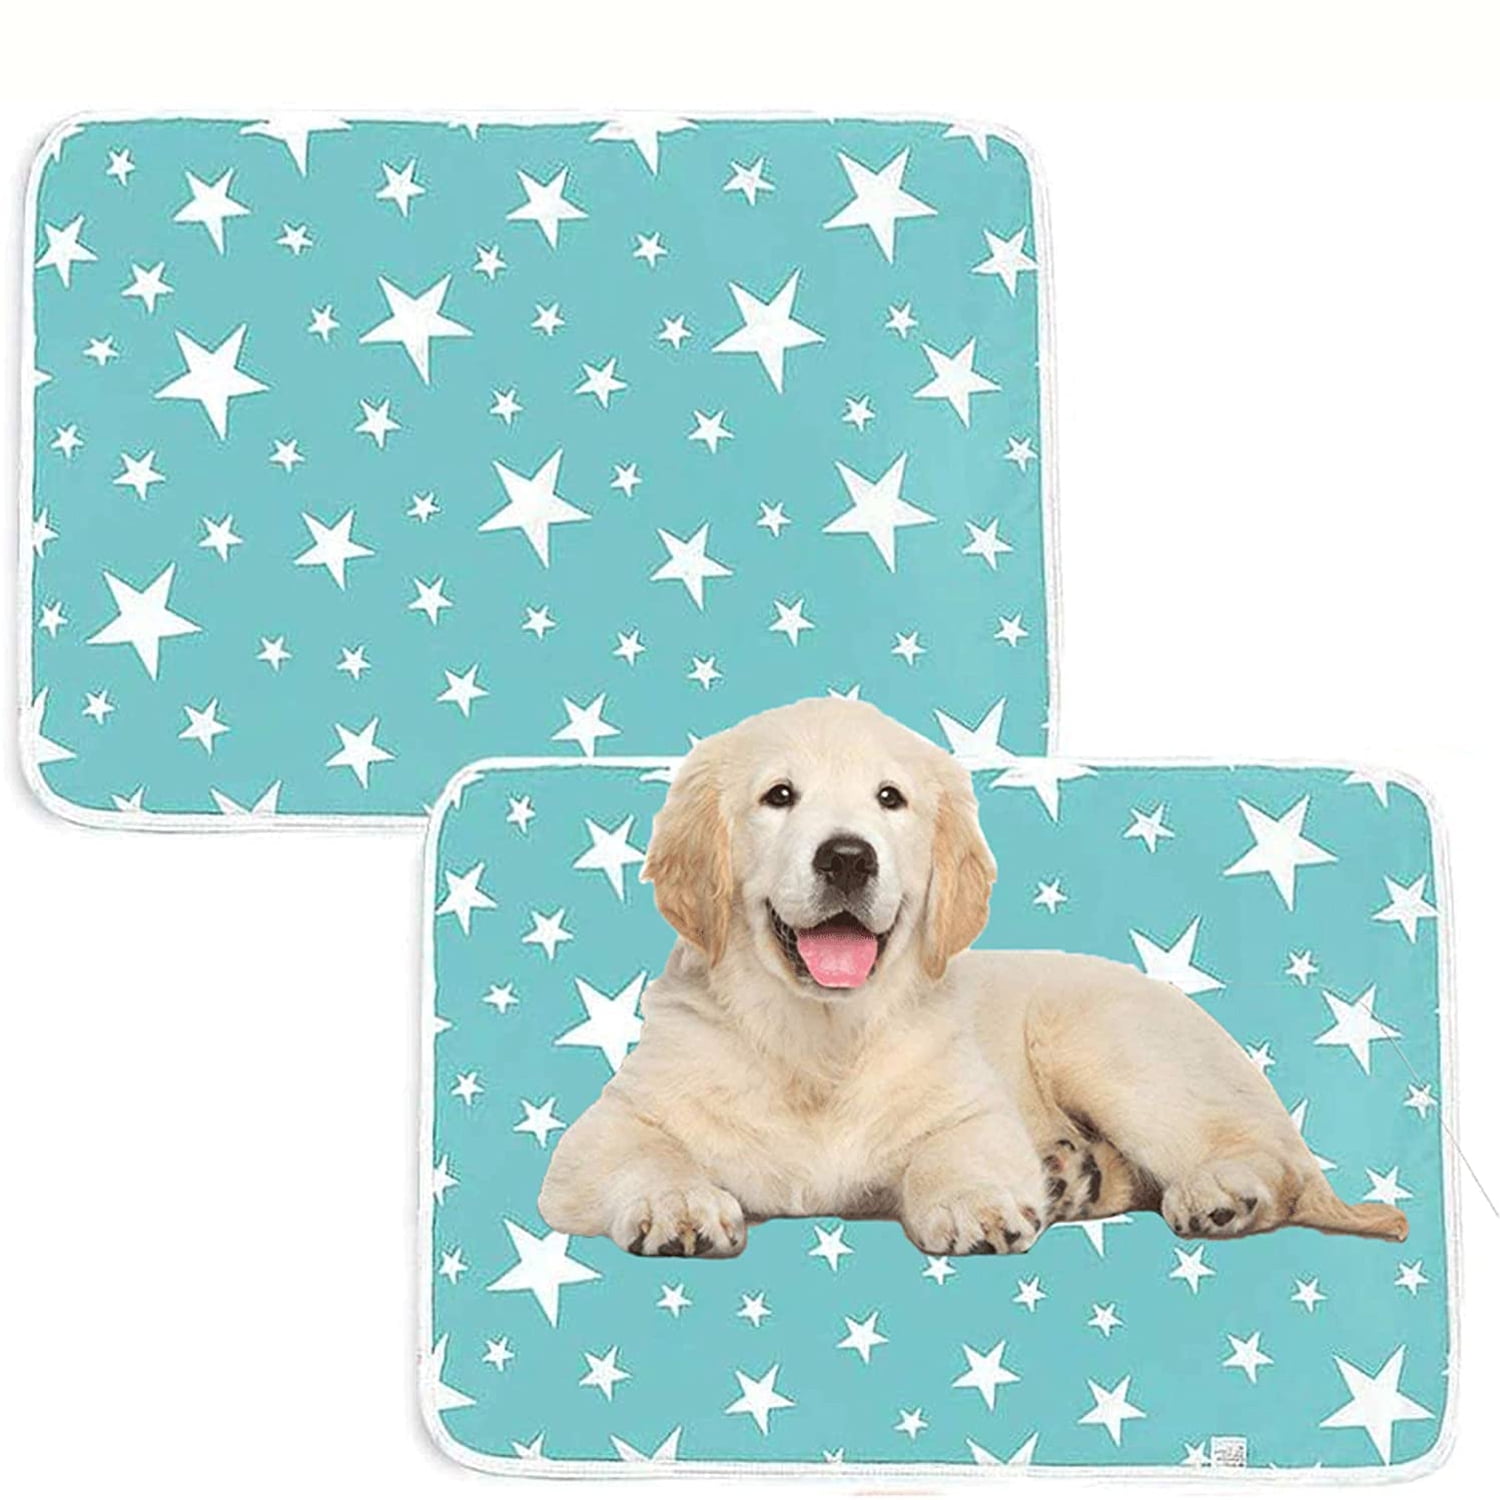 Puppy Rabbit Wee Whelping Pad for Indoor Outdoor Car Travel 50x70cm Reusable Puppy Training Pads Waterproof Super Absorbency Dog Pads Pet Incontinence pads Ledeak 2Pcs Washable Dog Pee Pads